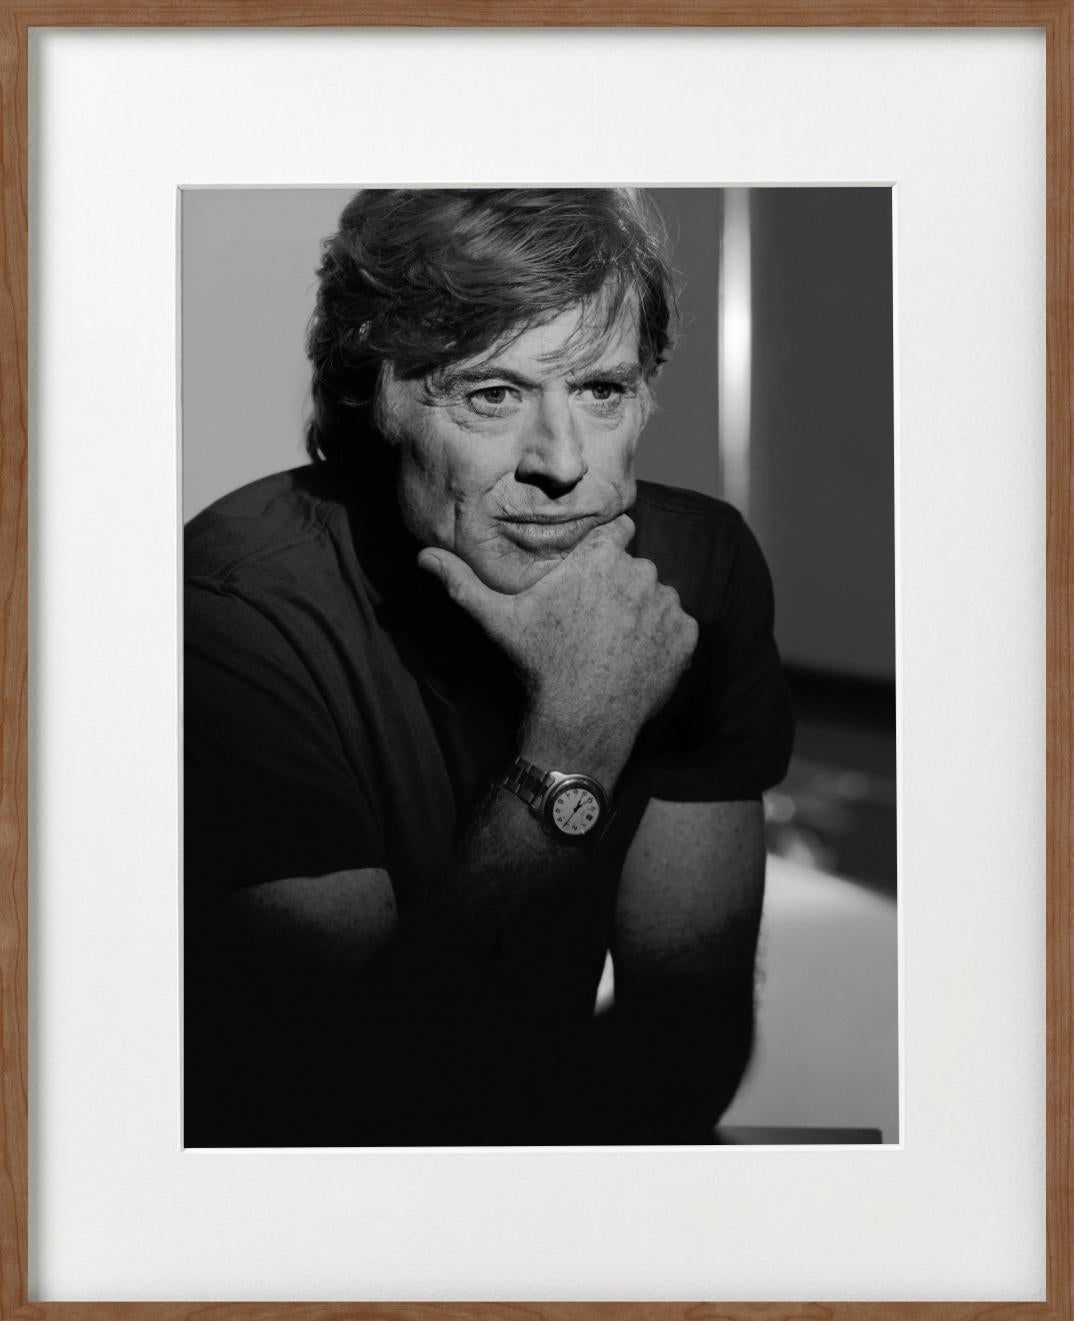 Robert Redford Unseen - Portrait of the actor, director and Hollywood legend - Black Portrait Photograph by Albert Watson